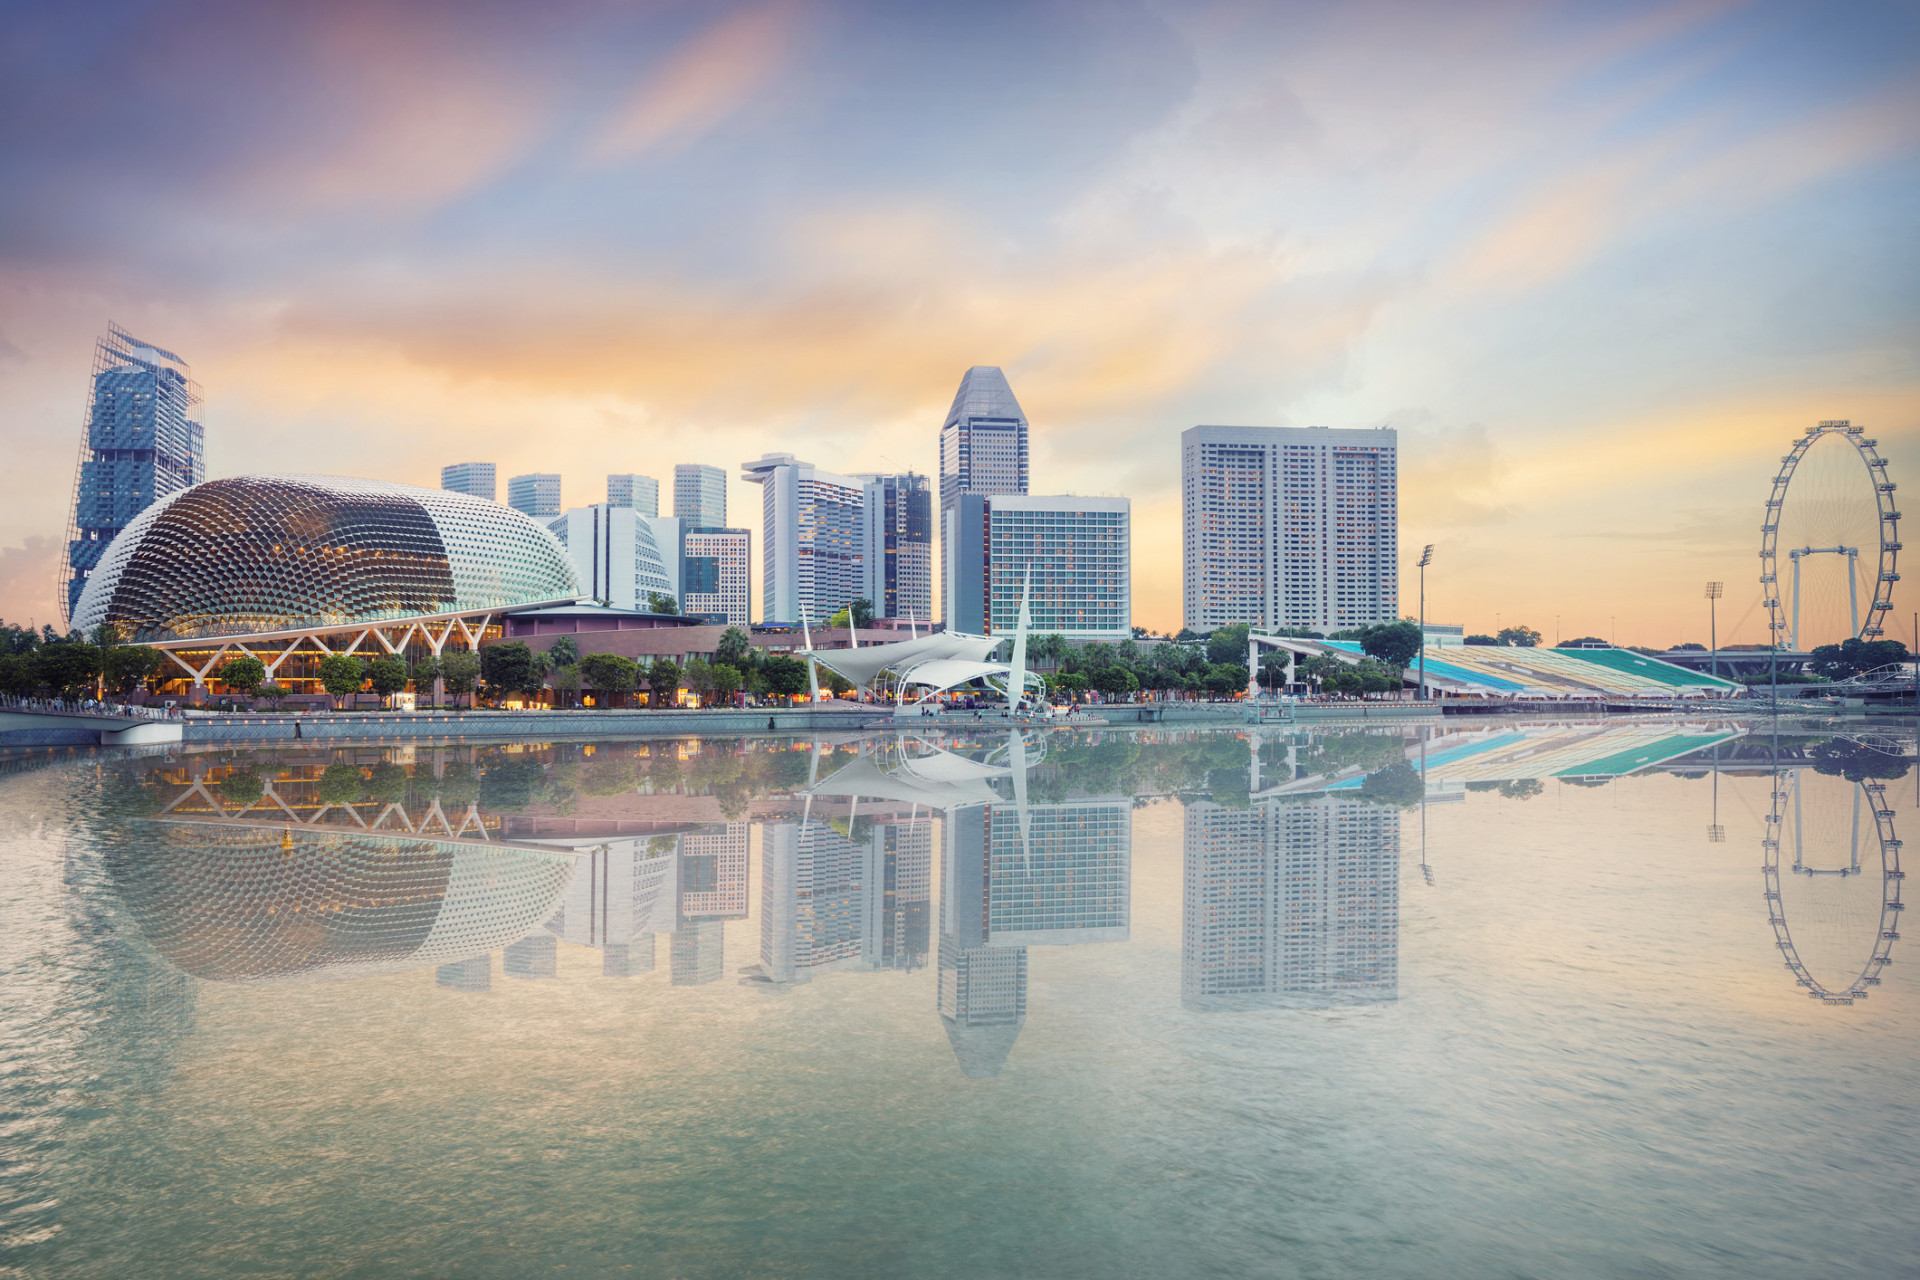 Singapore's easy transportation system and safe streets make it a great spot for solo travelers. The metropolis also features nature-focused attractions, such as the Gardens by the Bay.<p><a href="https://www.msn.com/en-us/community/channel/vid-7xx8mnucu55yw63we9va2gwr7uihbxwc68fxqp25x6tg4ftibpra?cvid=94631541bc0f4f89bfd59158d696ad7e">Follow us and access great exclusive content every day</a></p>